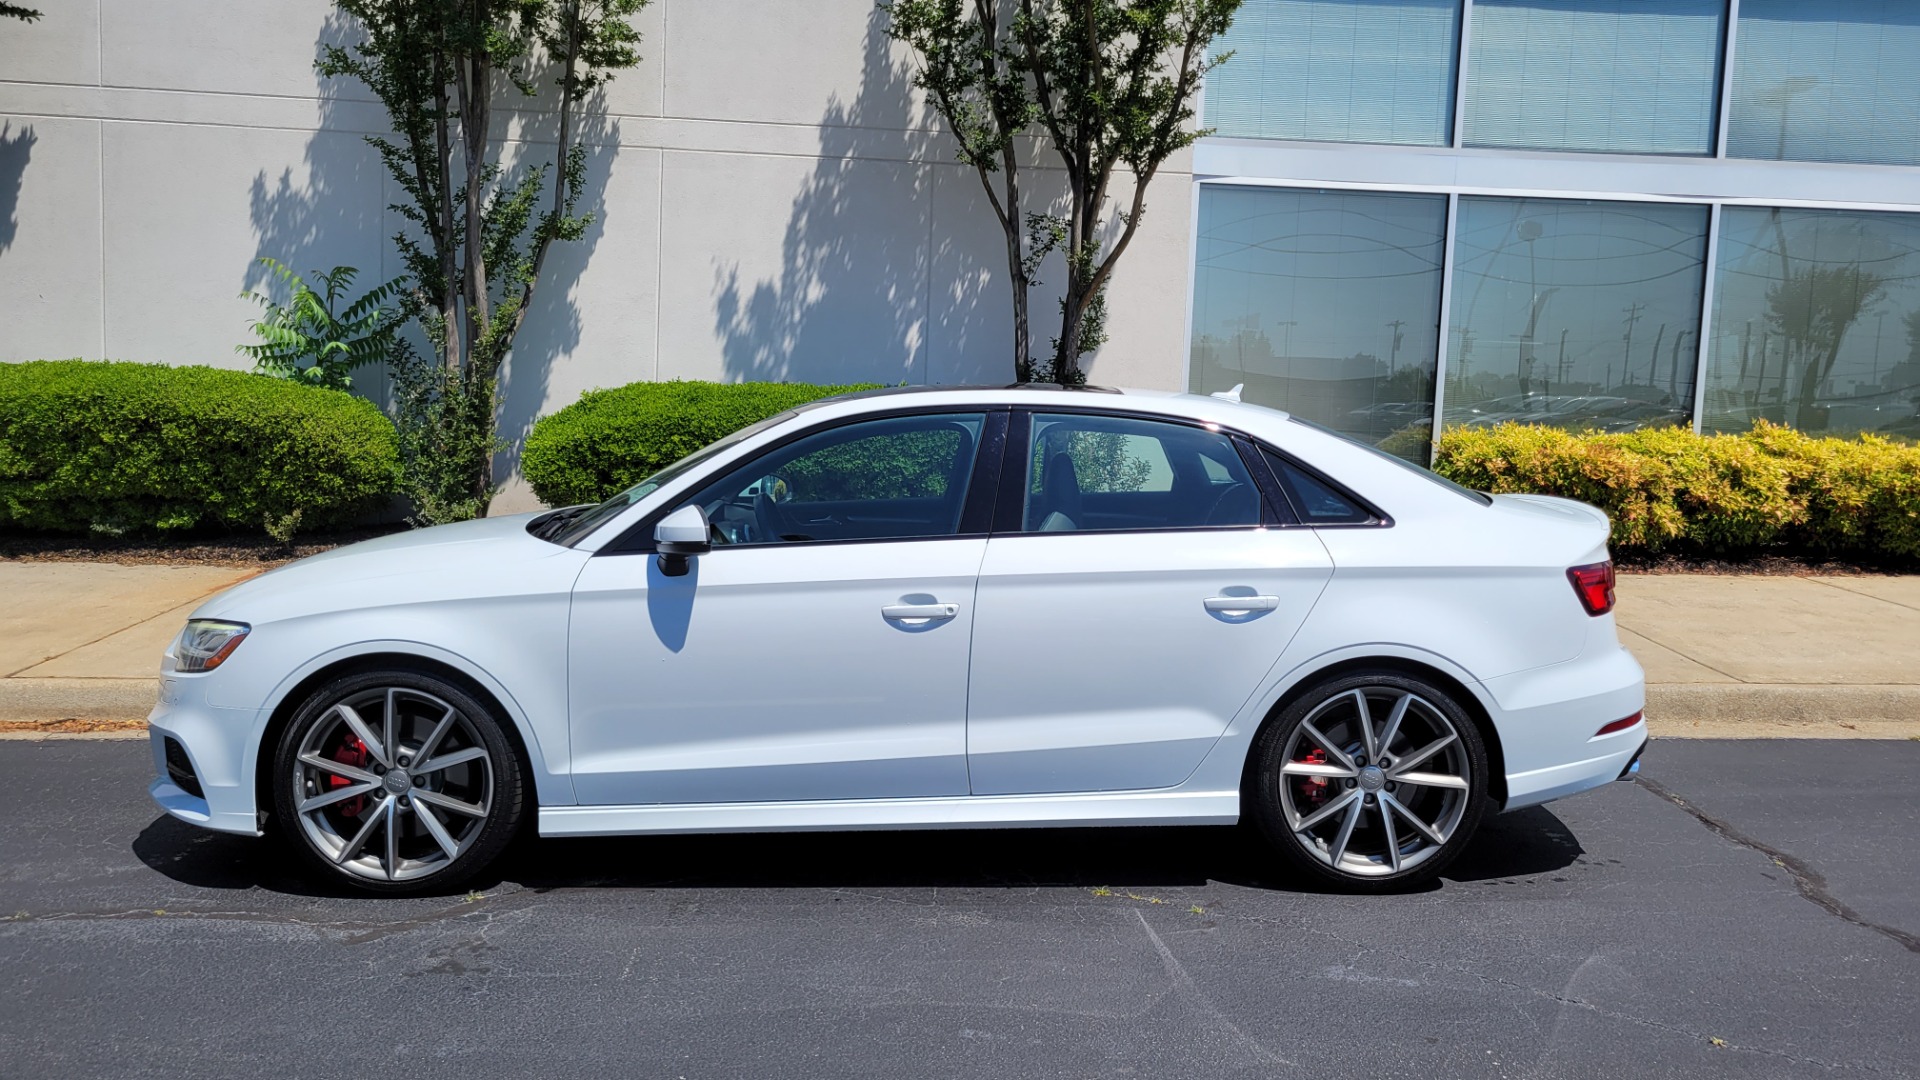 Used 2018 Audi S3 PREMIUM PLUS TECHNOLOGY / NAV / S-SPORT / BLACK OPTIC / B&O SND / REARVIEW for sale $39,995 at Formula Imports in Charlotte NC 28227 3